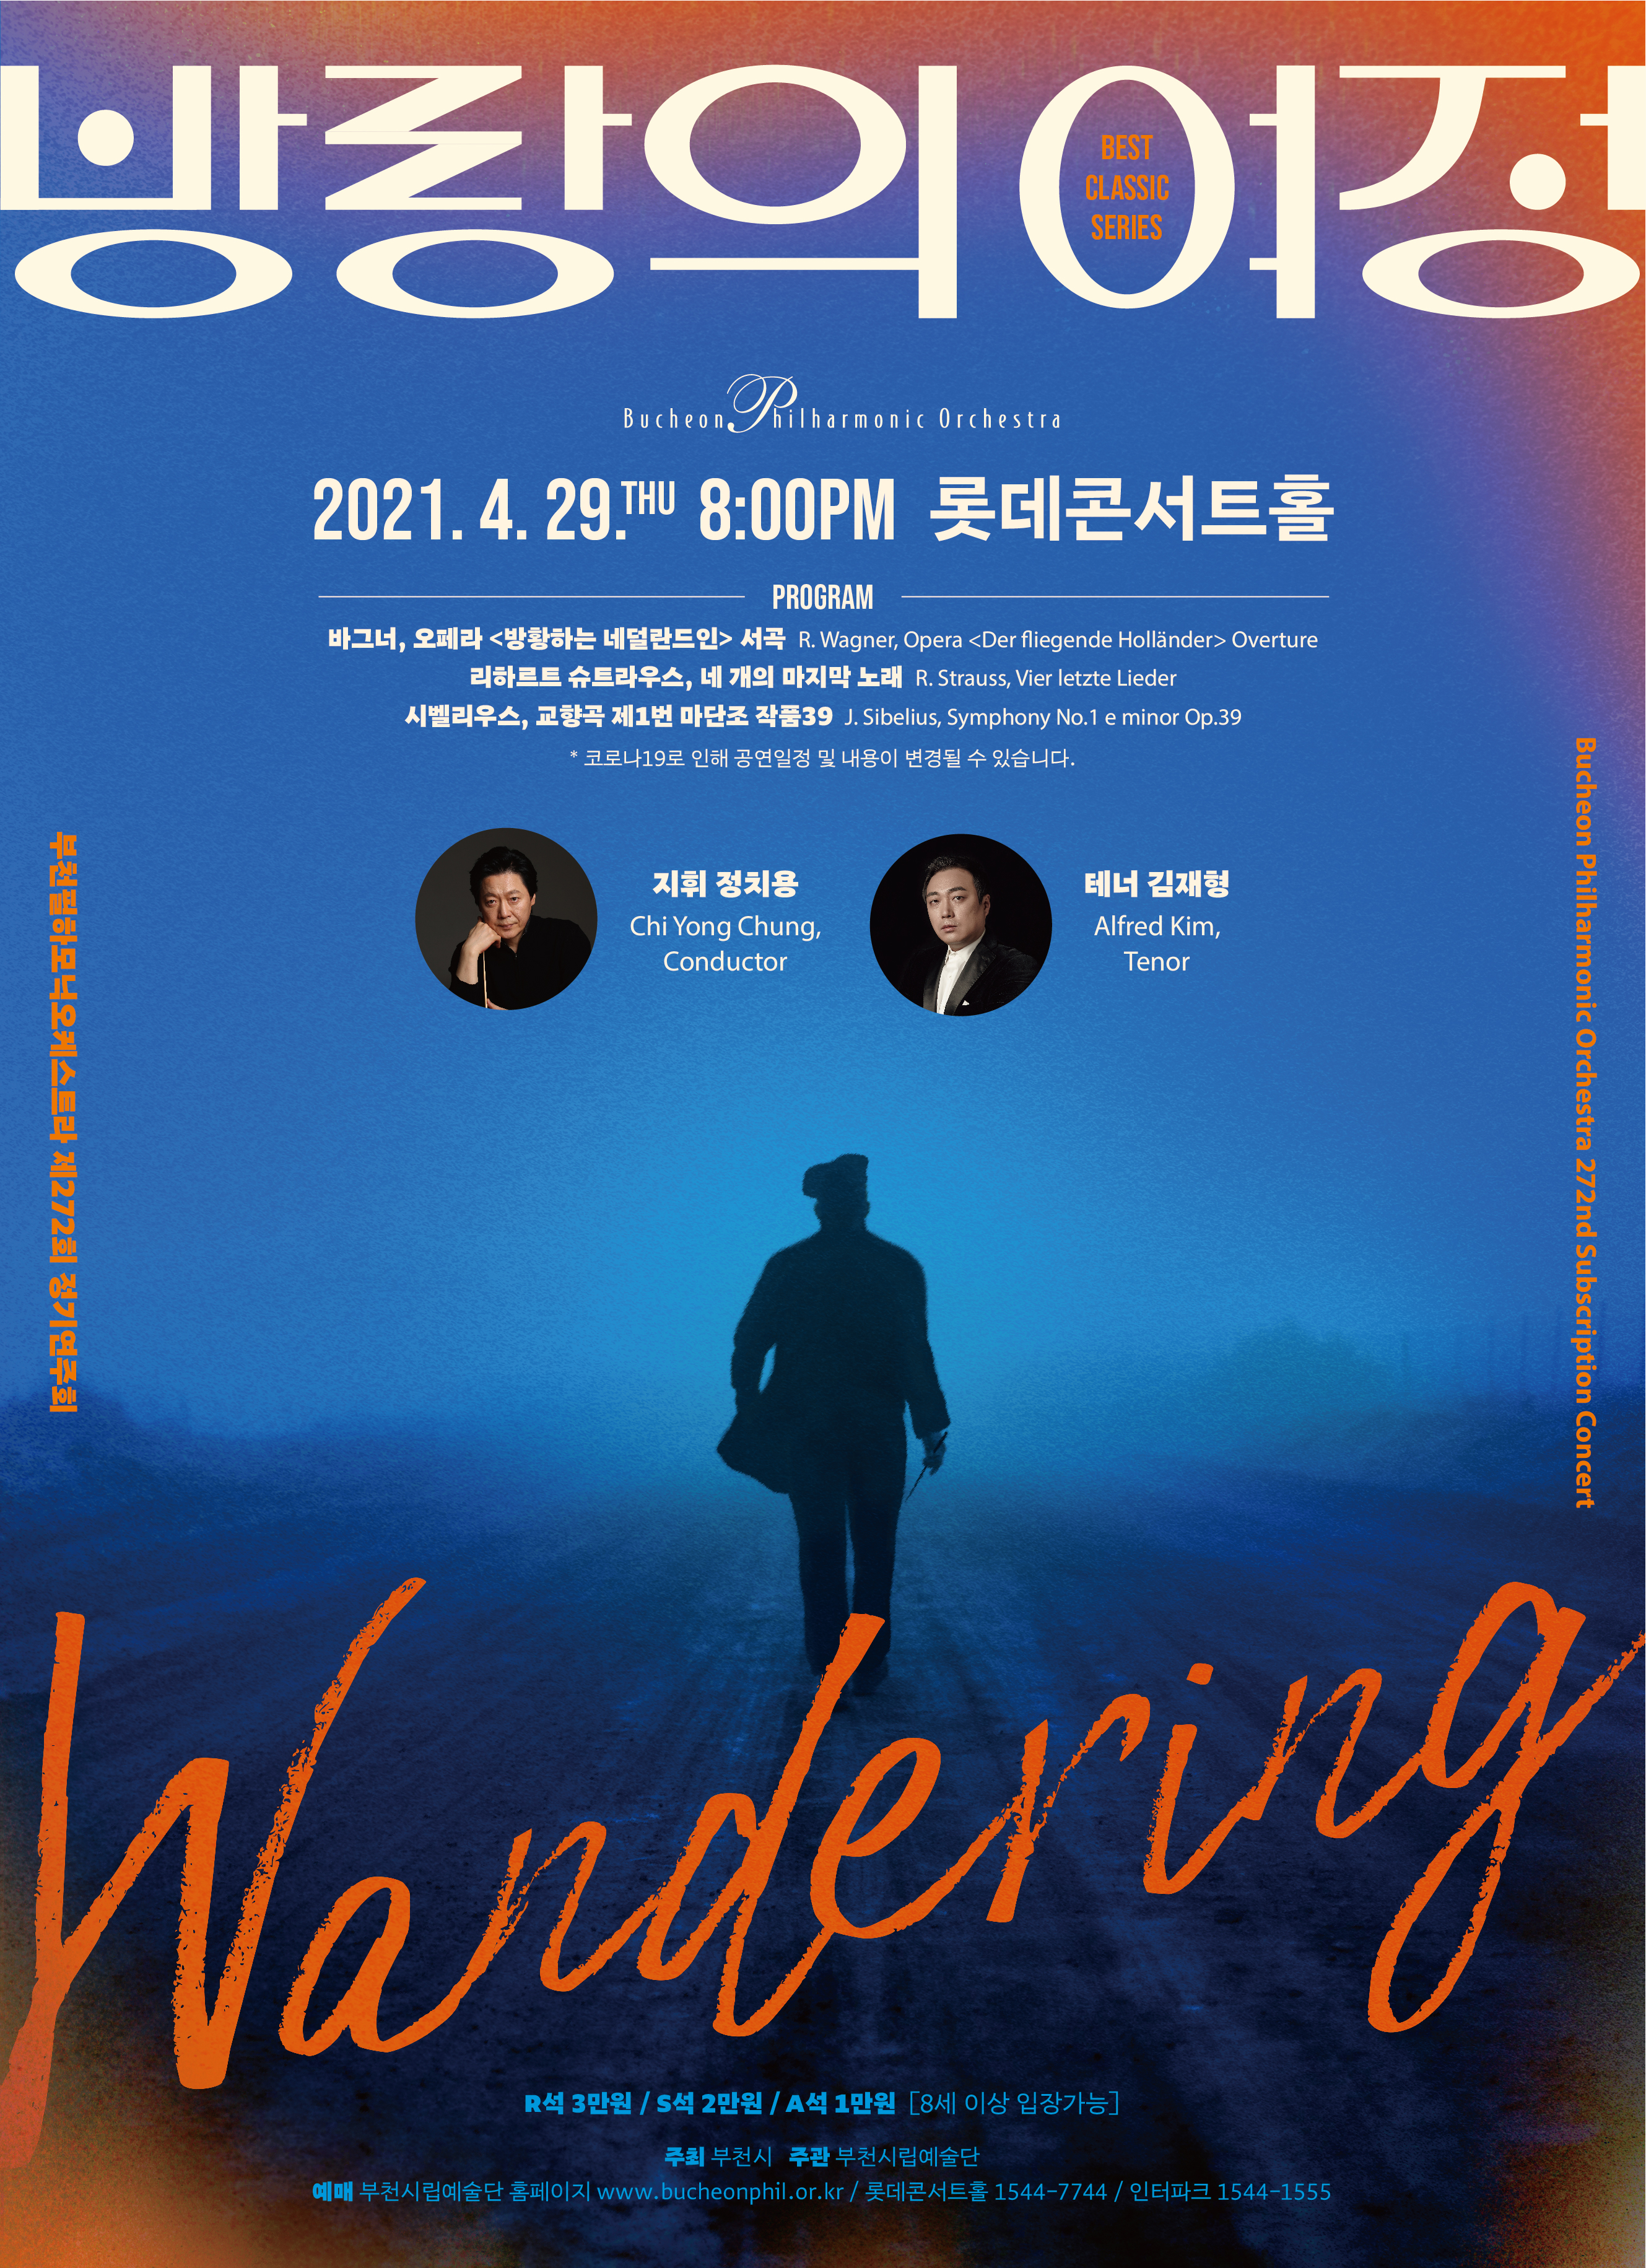 [4.29]Bucheon Philharmonic Orchestra 272nd Subscription Concert 